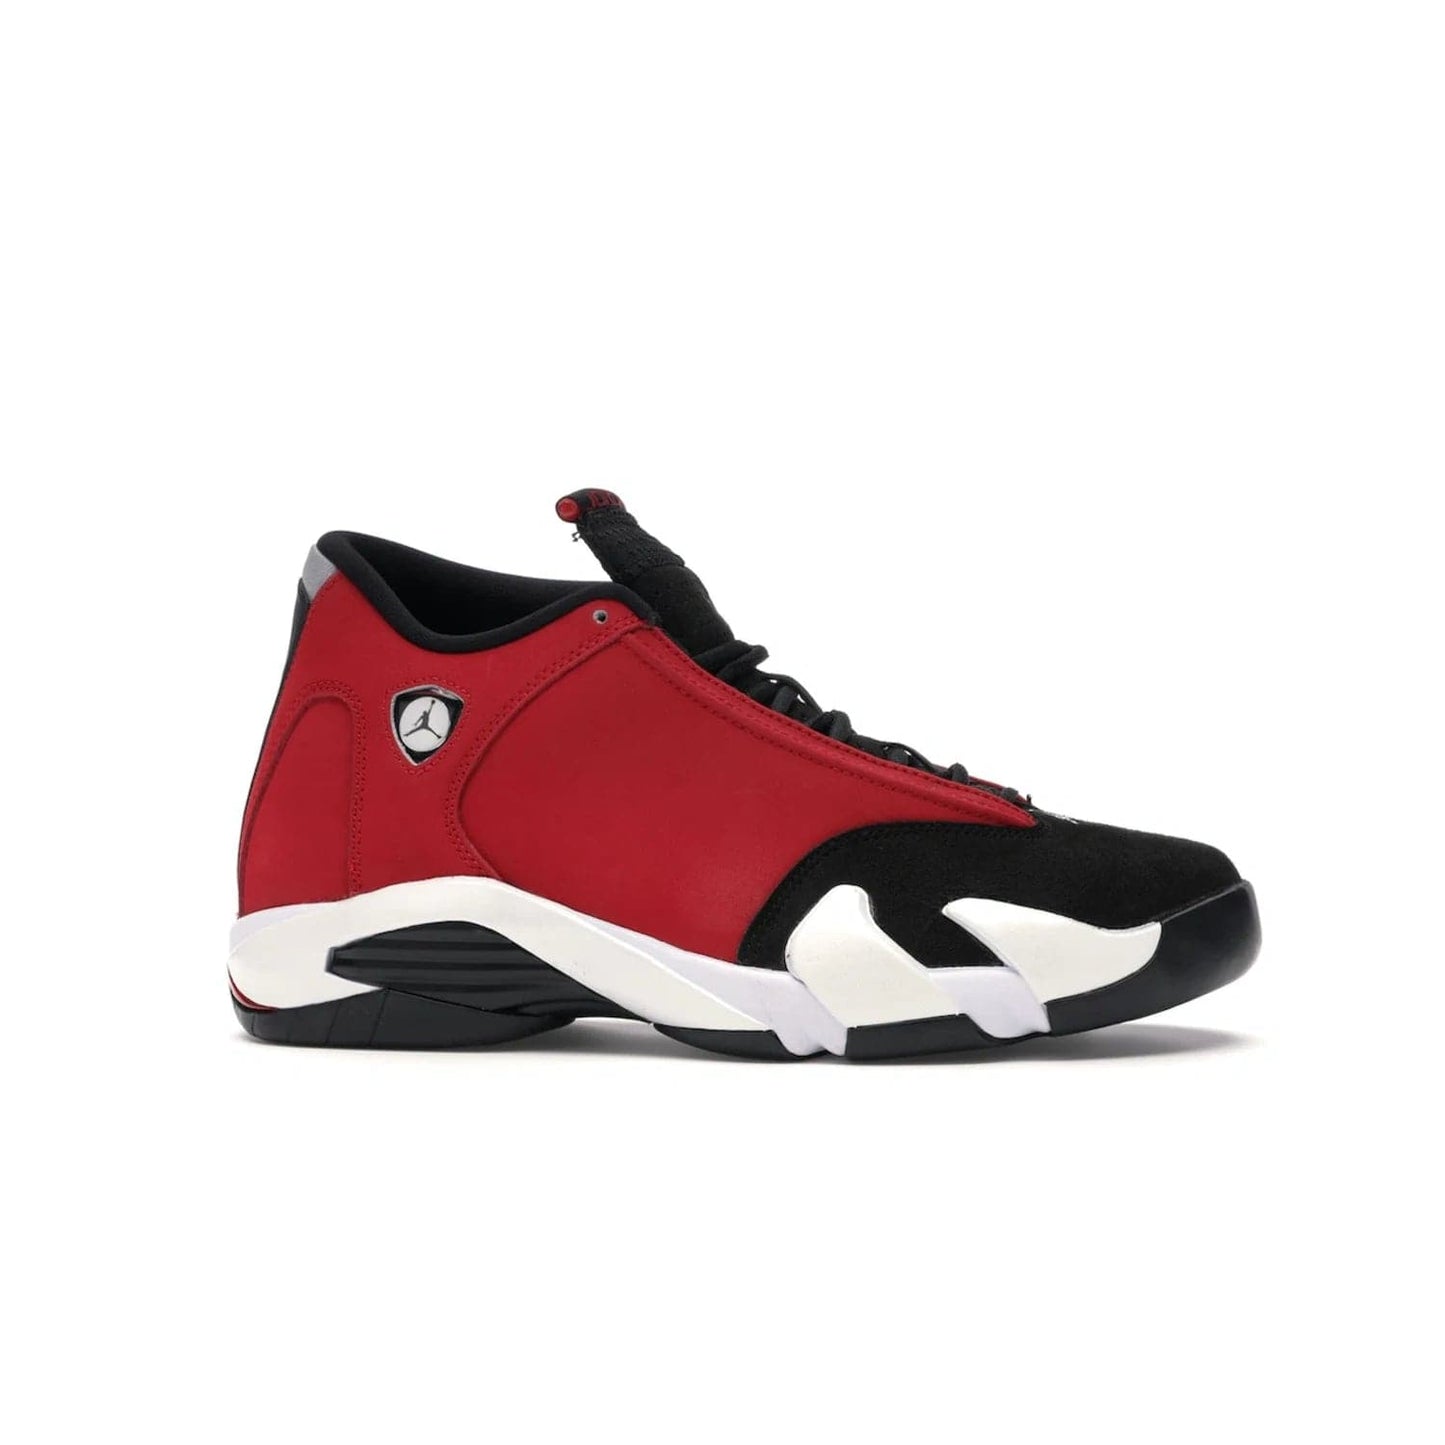 Jordan 14 Retro Gym Red Toro - Image 2 - Only at www.BallersClubKickz.com - Feel the Chicago Bulls energy with the Jordan 14 Retro Gym Red Toro! Black, red, and white design unites performance and fashion. Get your hands on this limited edition Jordan and show off your style today.